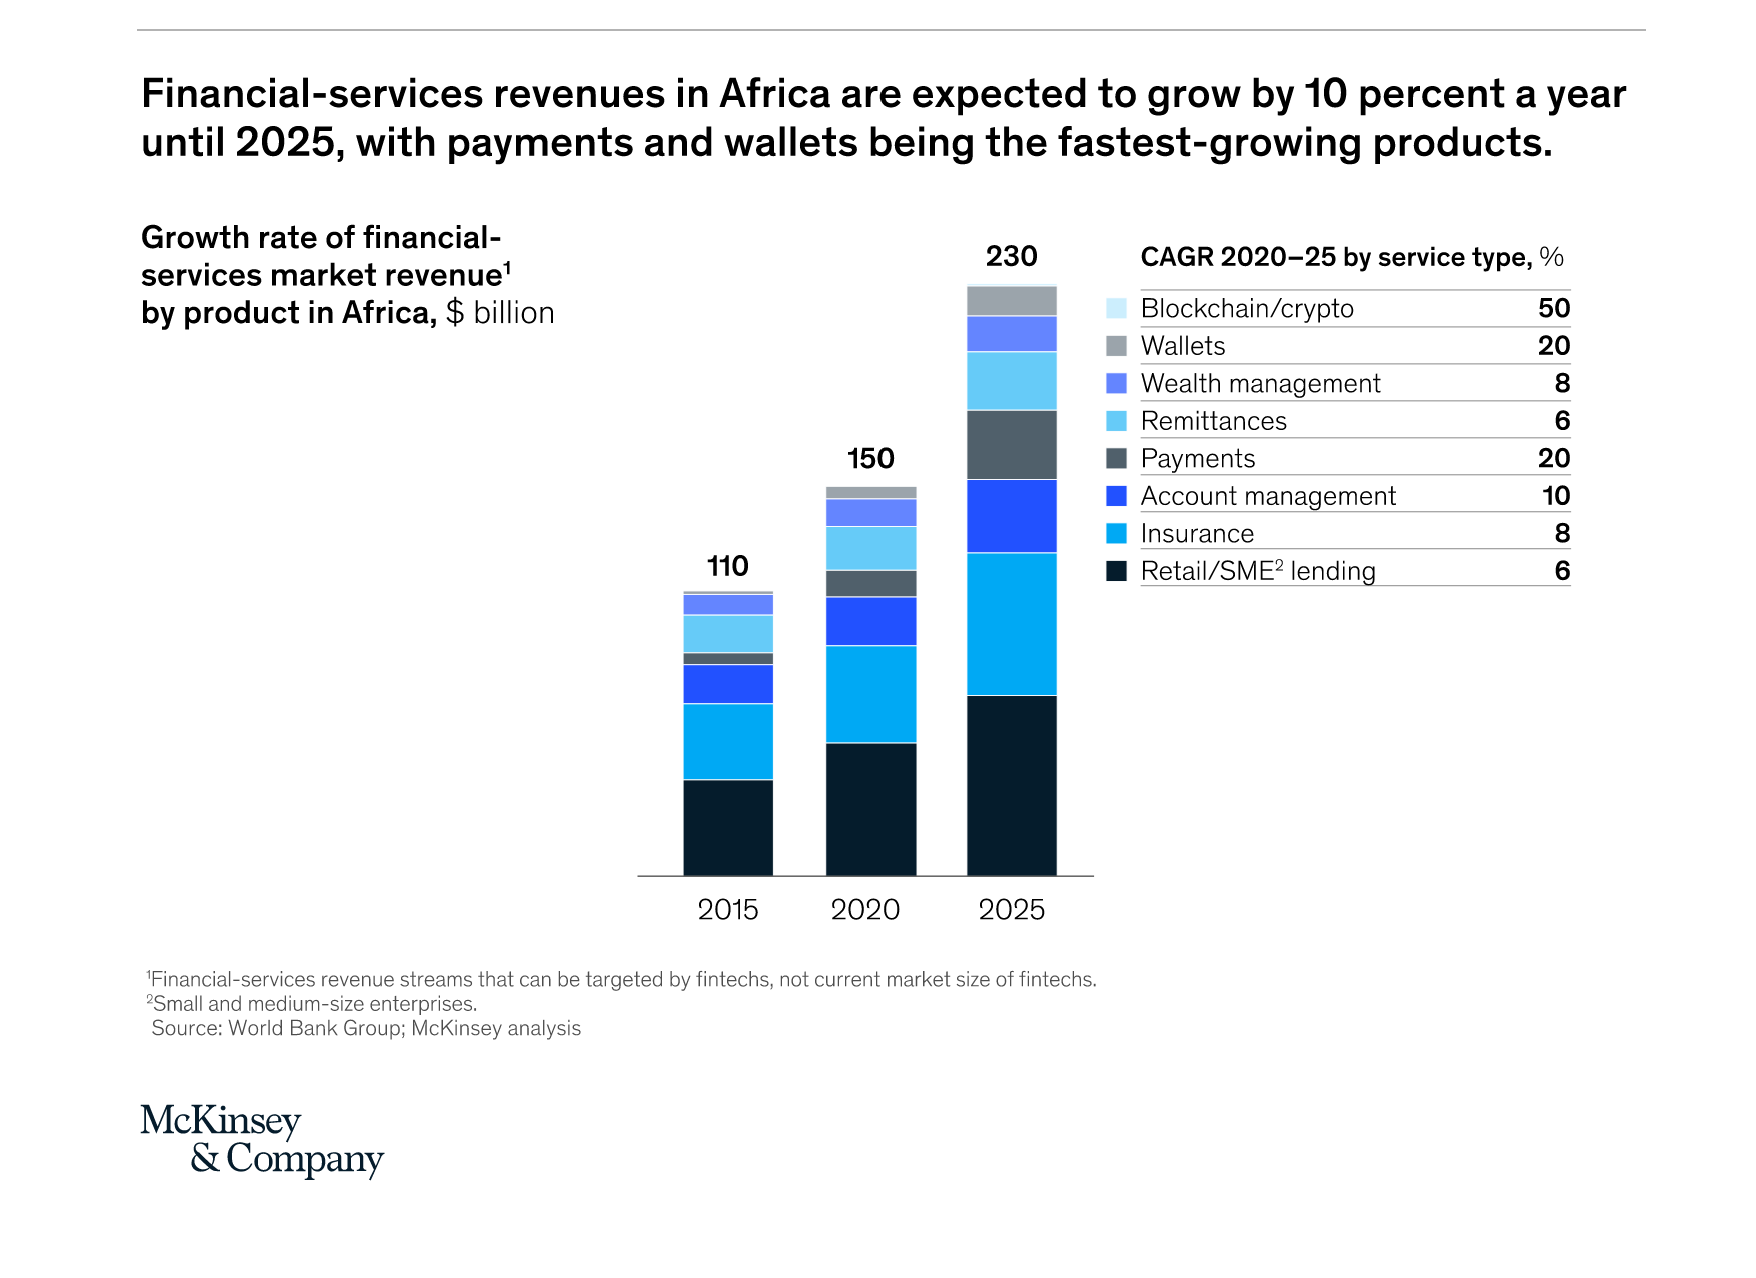 According to research from McKinsey, the success of fintech companies in Africa is being driven by increasing smartphone ownership, declining internet costs, expanded network coverage, and a young, rapidly growing and urbanizing population.